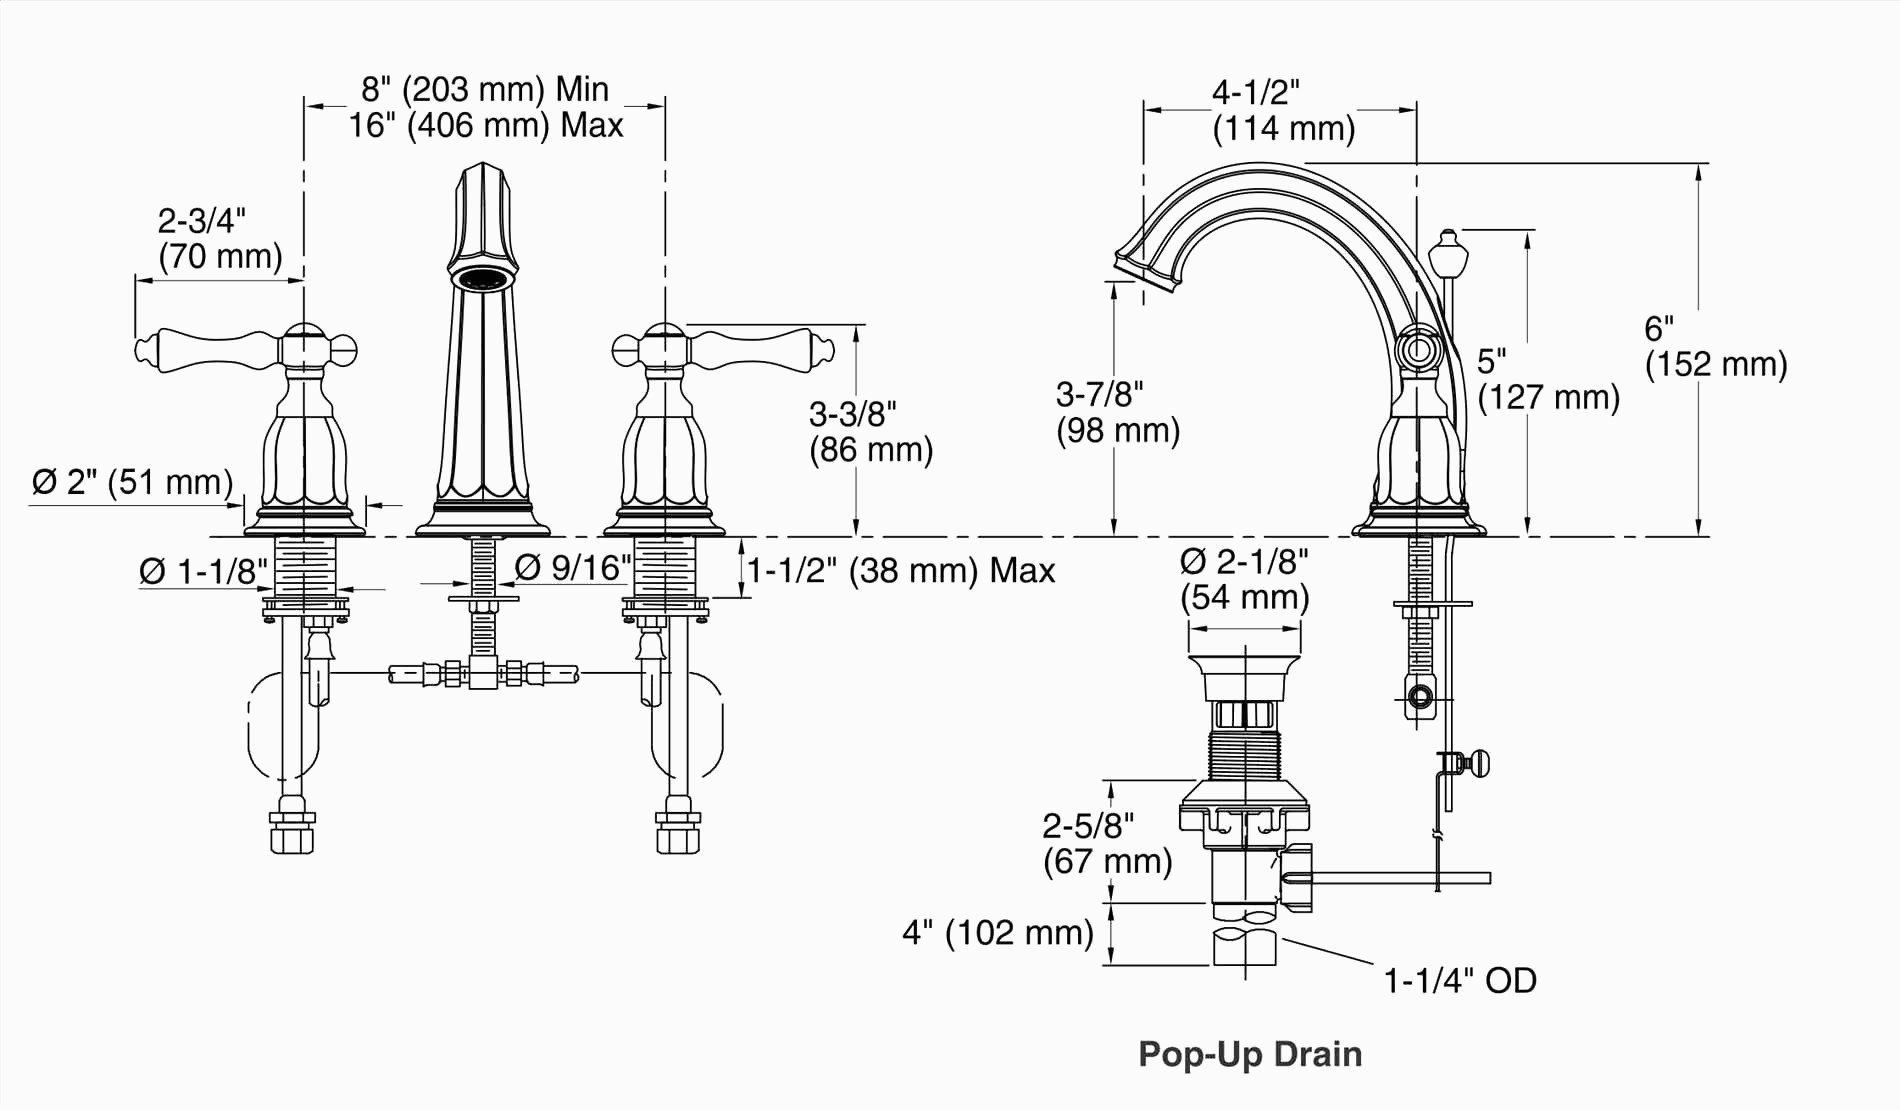 Grohe Ladylux Plus Parts Diagram Grohe Kitchen Faucets Parts Beautiful Kitchen Amazing Grohe Kitchen Of Grohe Ladylux Plus Parts Diagram